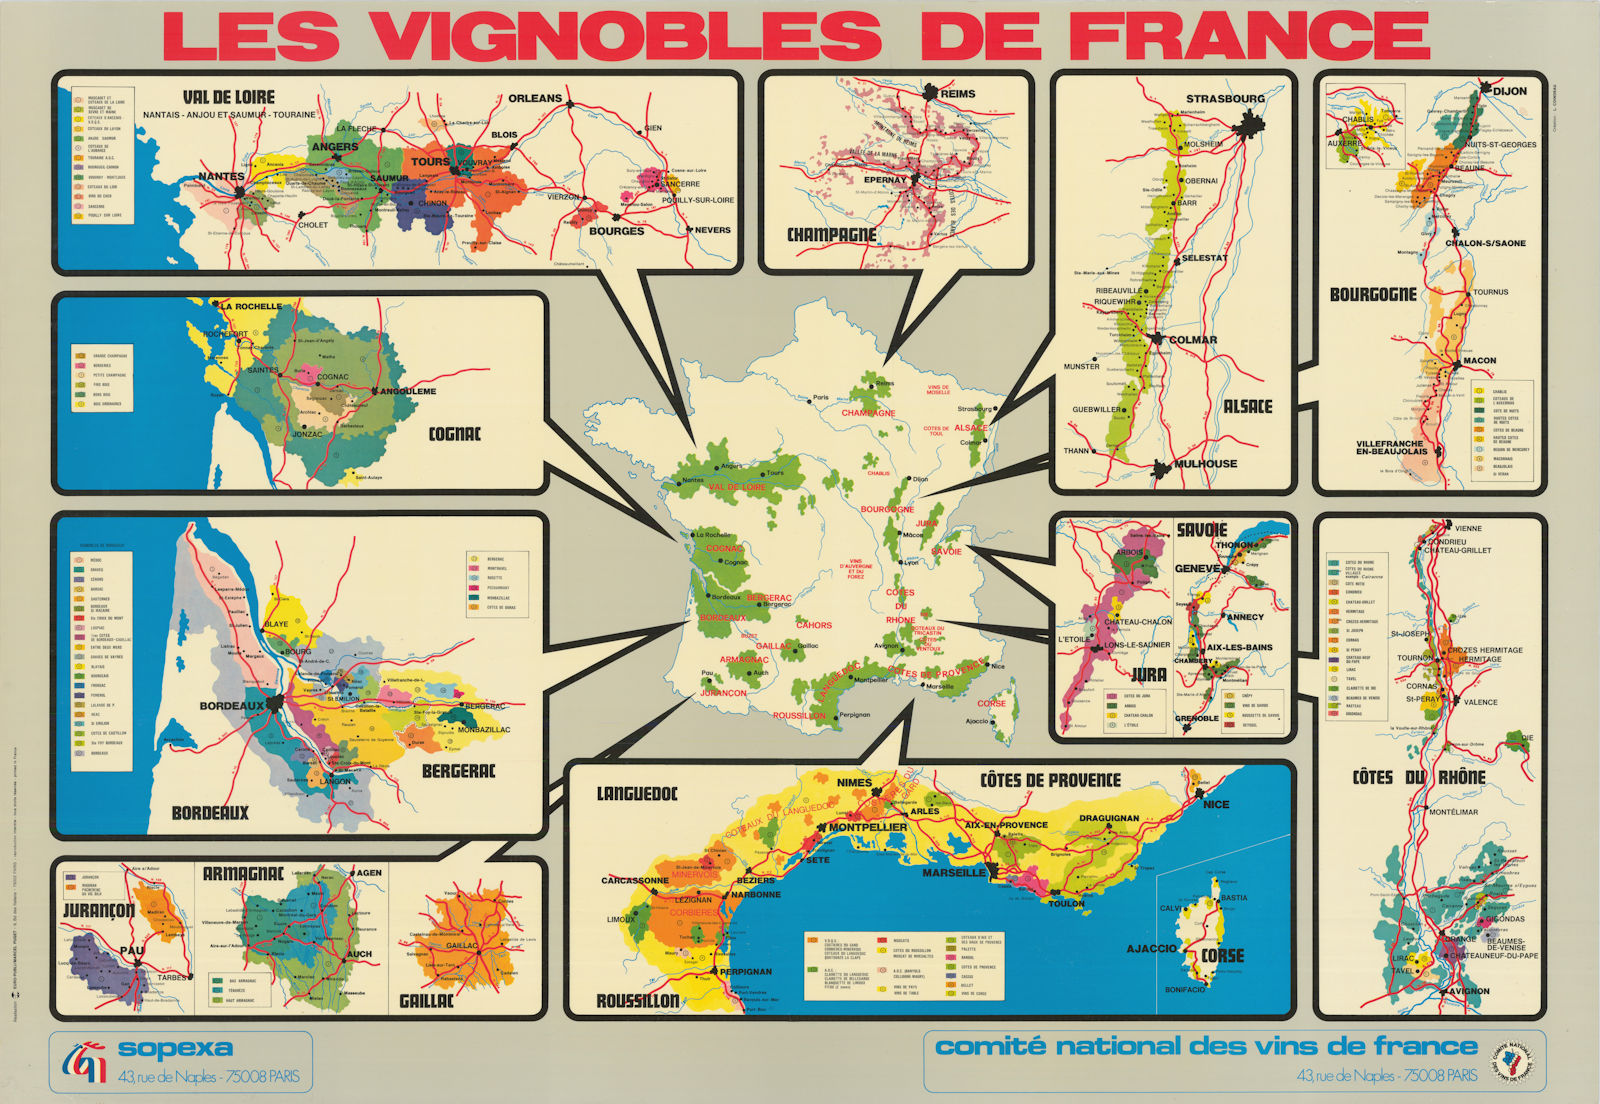 Vignobles de France. French wine regions poster map. SOPEXA/CNVF/Coindeau 1970s